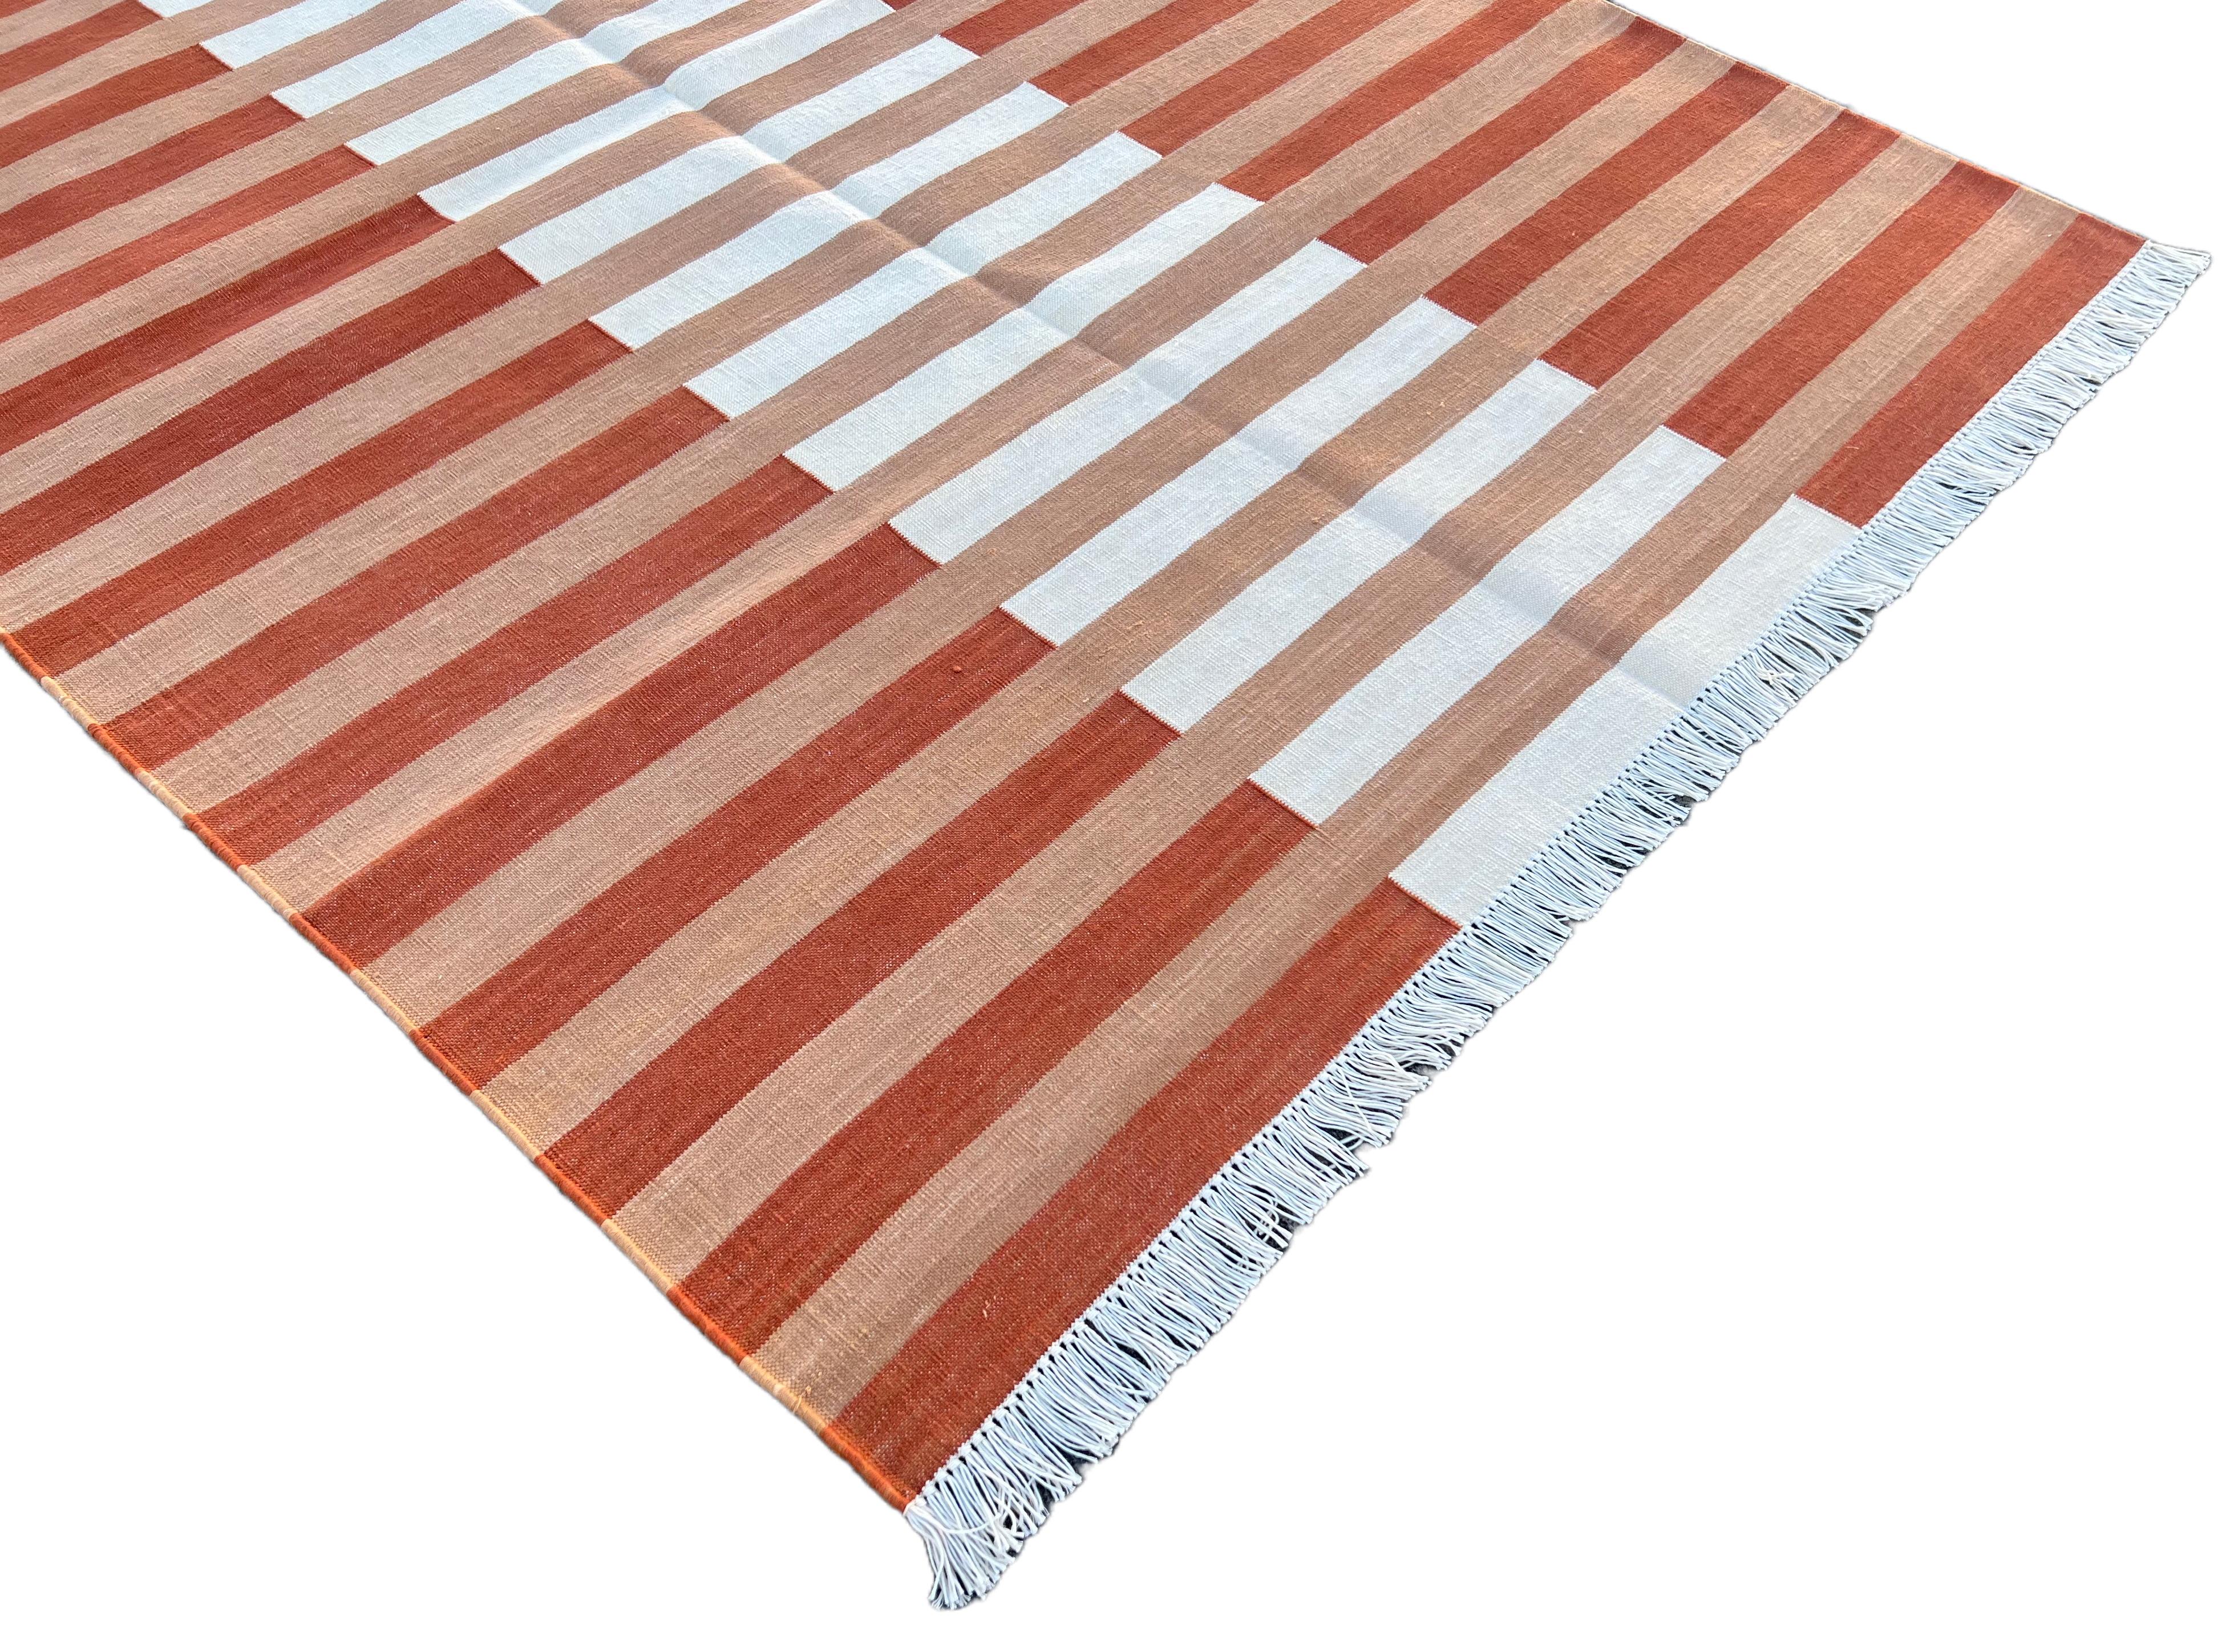 Hand-Woven Handmade Cotton Area Flat Weave Rug, 4x6 Tan And White Stripe Indian Dhurrie Rug For Sale